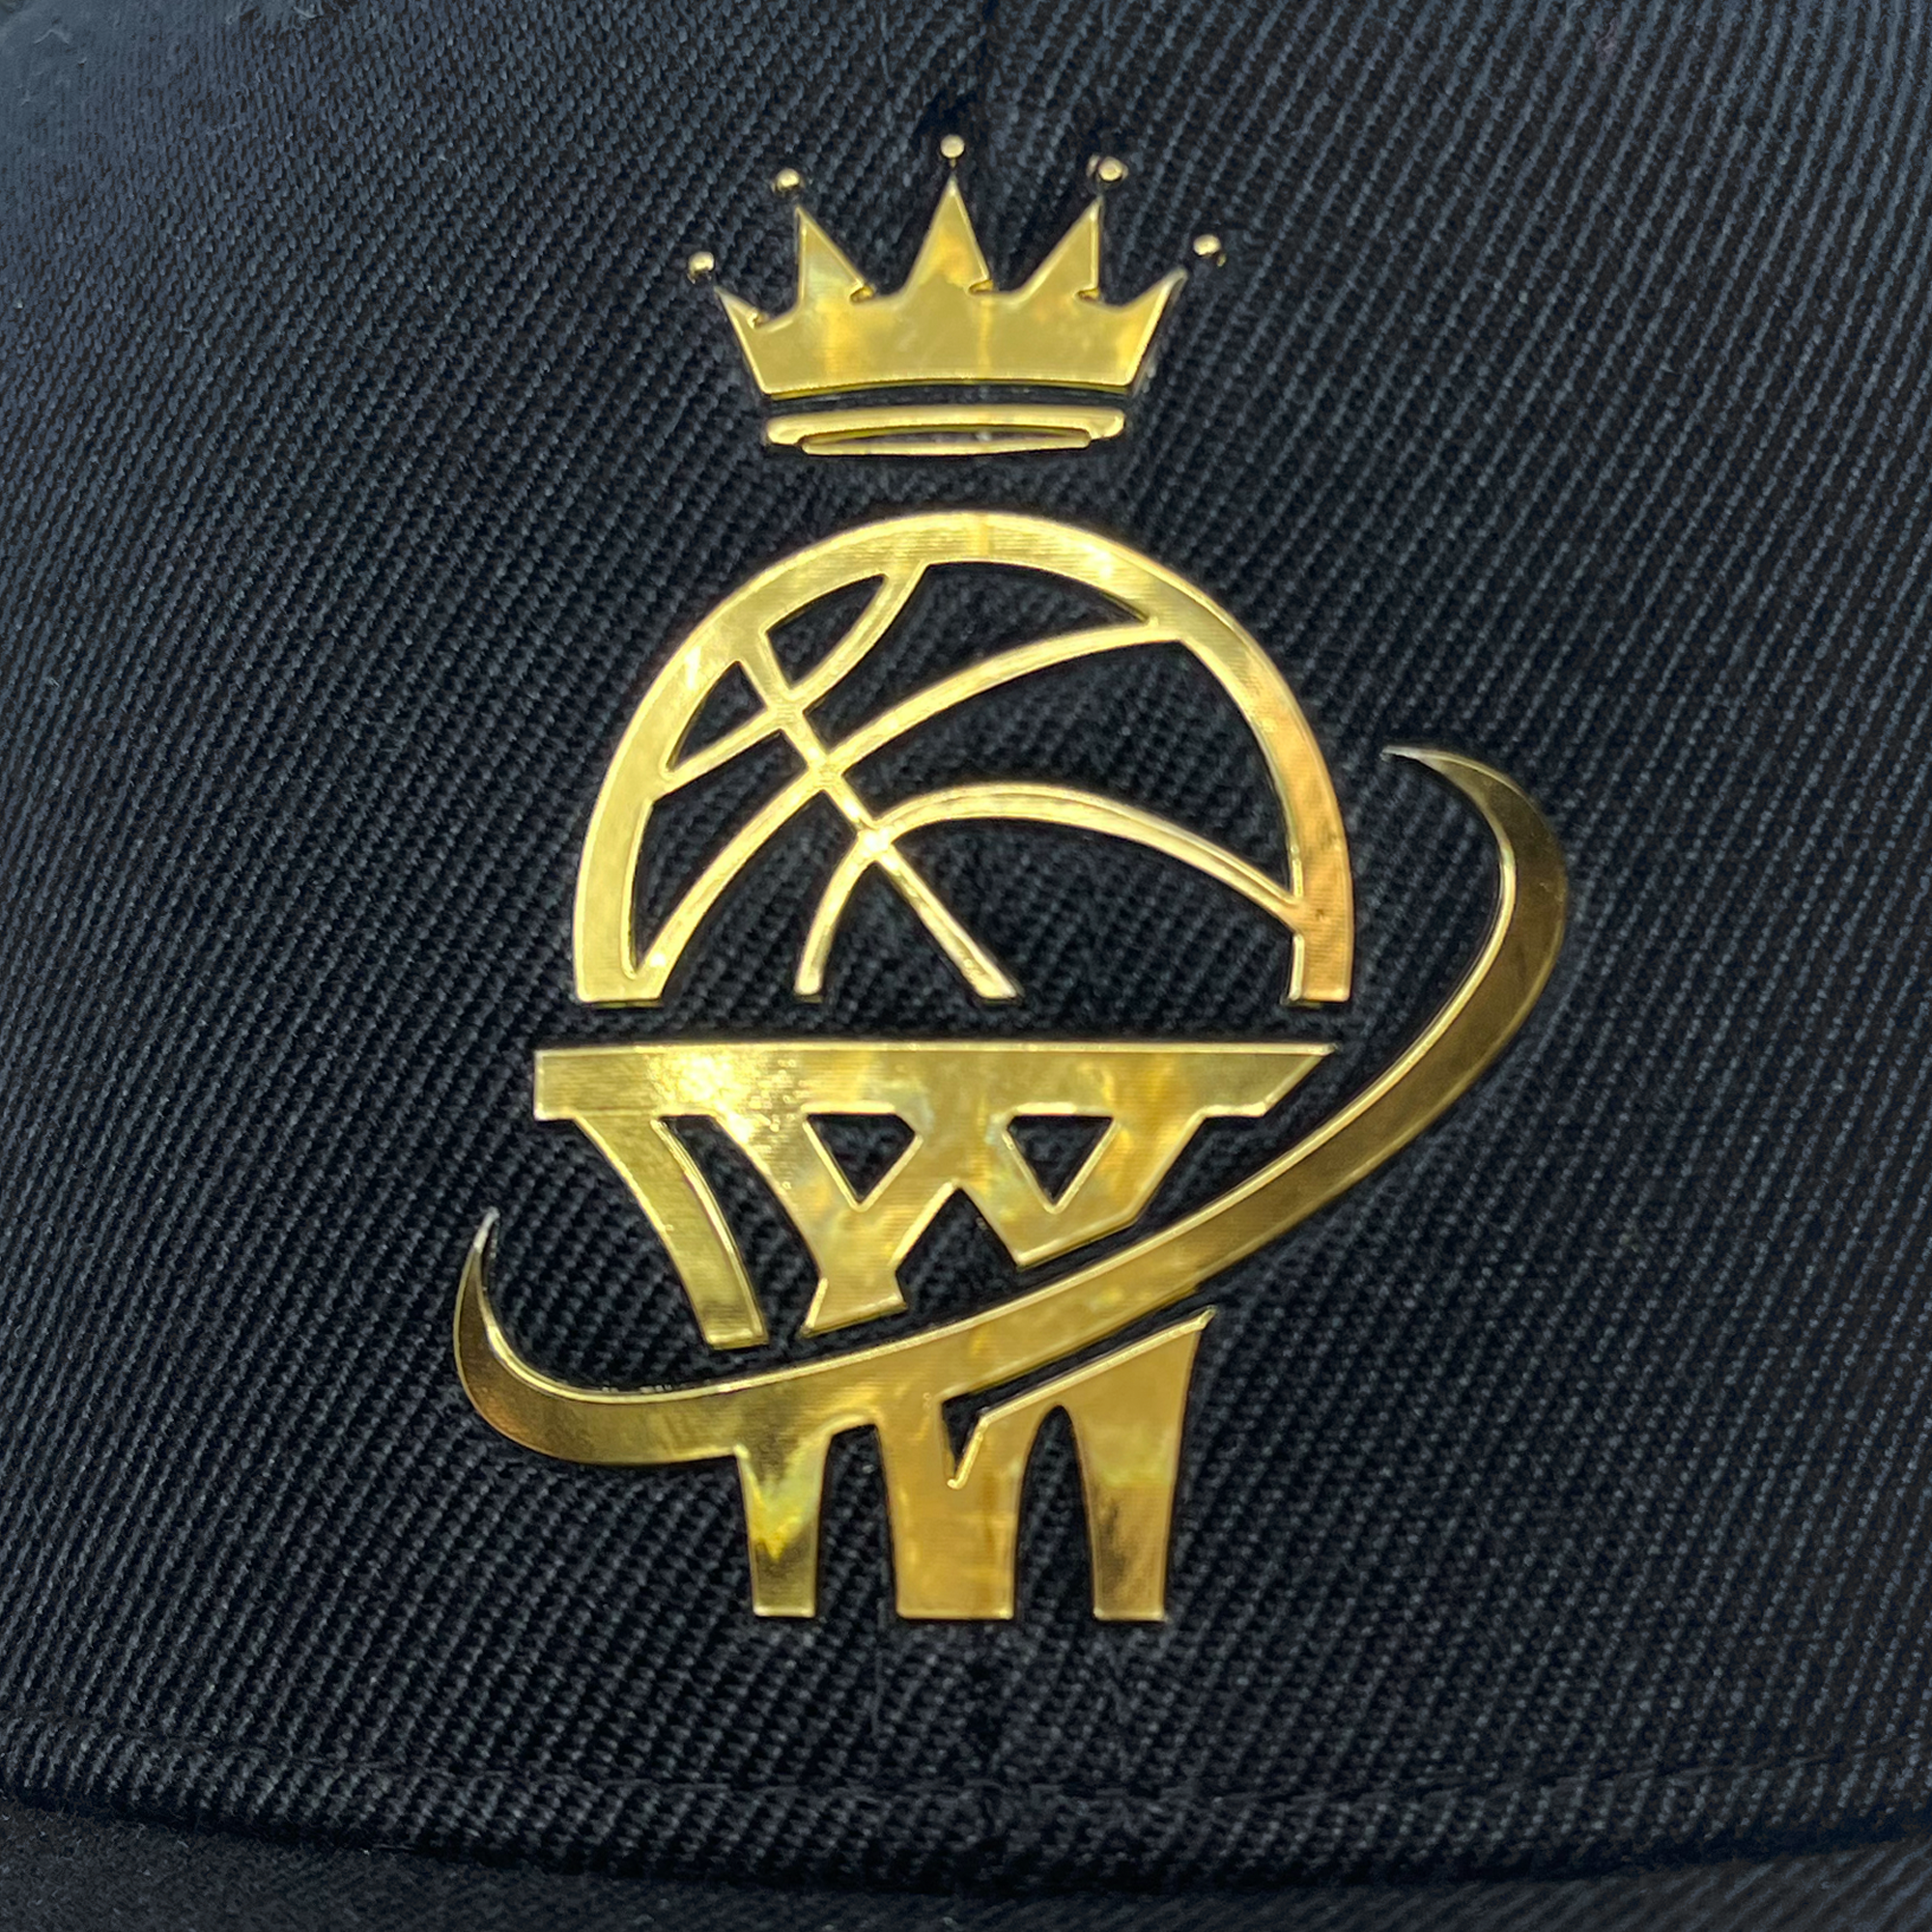 Detailed front view of a black snapback hat with gold WPBA logo on the front crown.